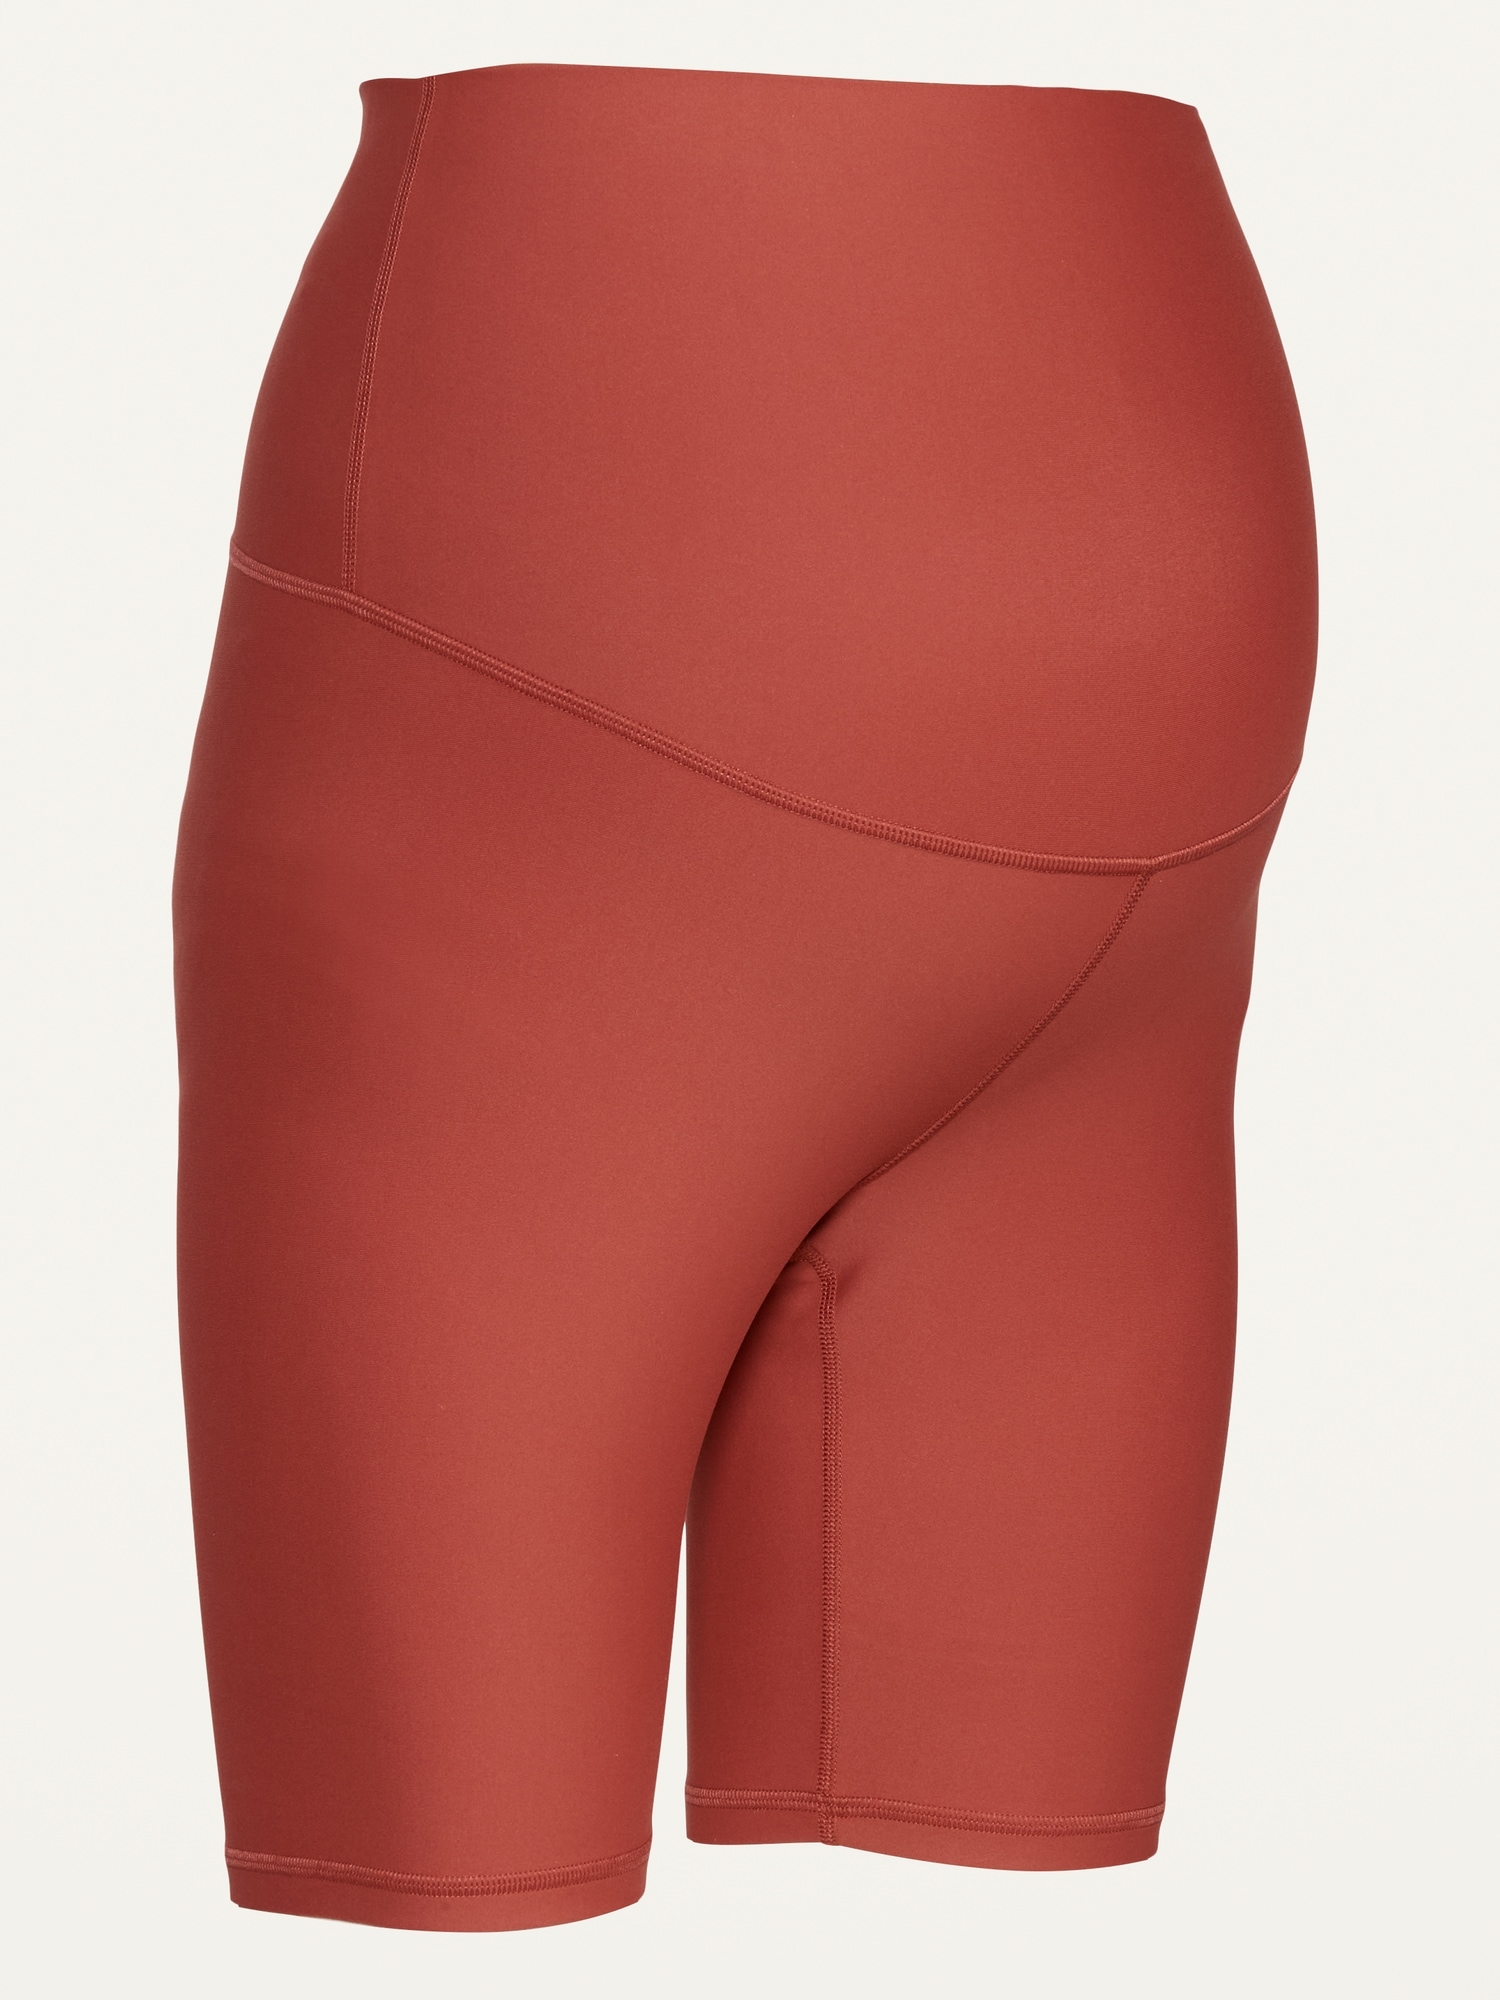 Red Pant Maternity Pants Ladies Cycle Shorts Woman Fashion Primark